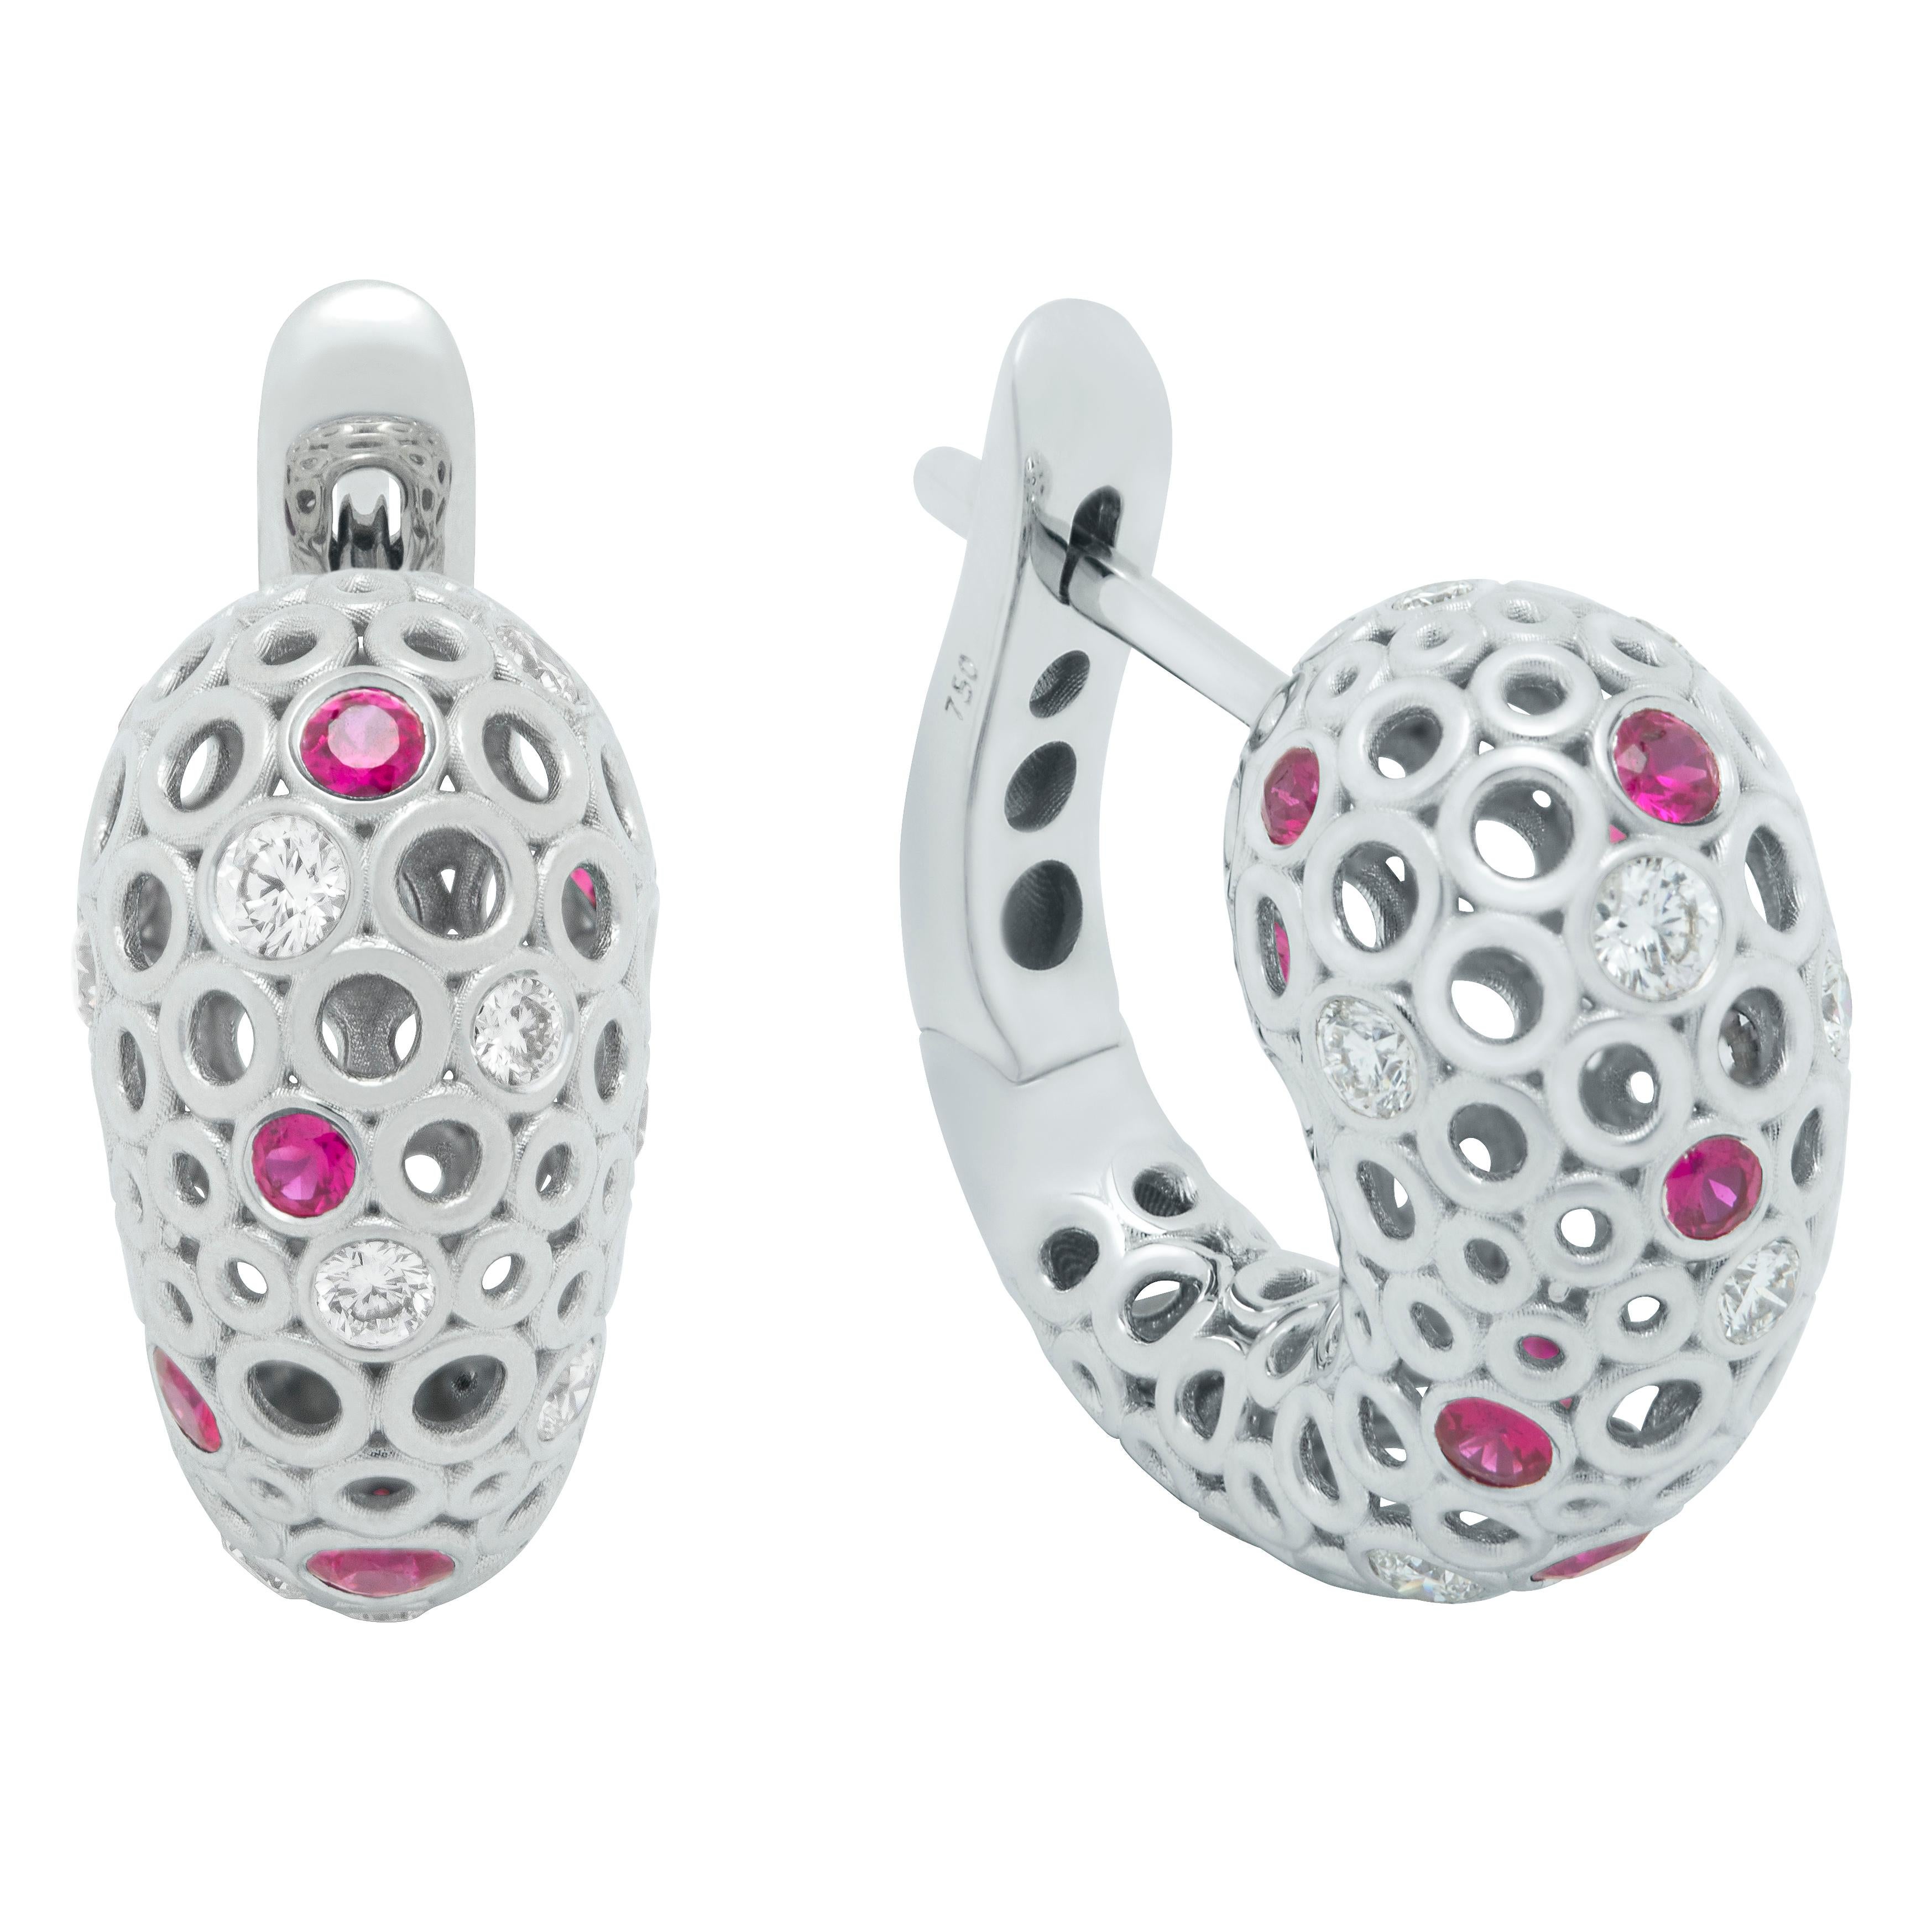 Diamonds Rubies 18 Karat White Gold Bubble Earrings
Incredibly light and airy Earrings from our Bubbles Collection. White 18 Karat Gold is made in the form of variety of small bubbles, some of which have 18 Rubies and 22 Diamonds setted. Instant